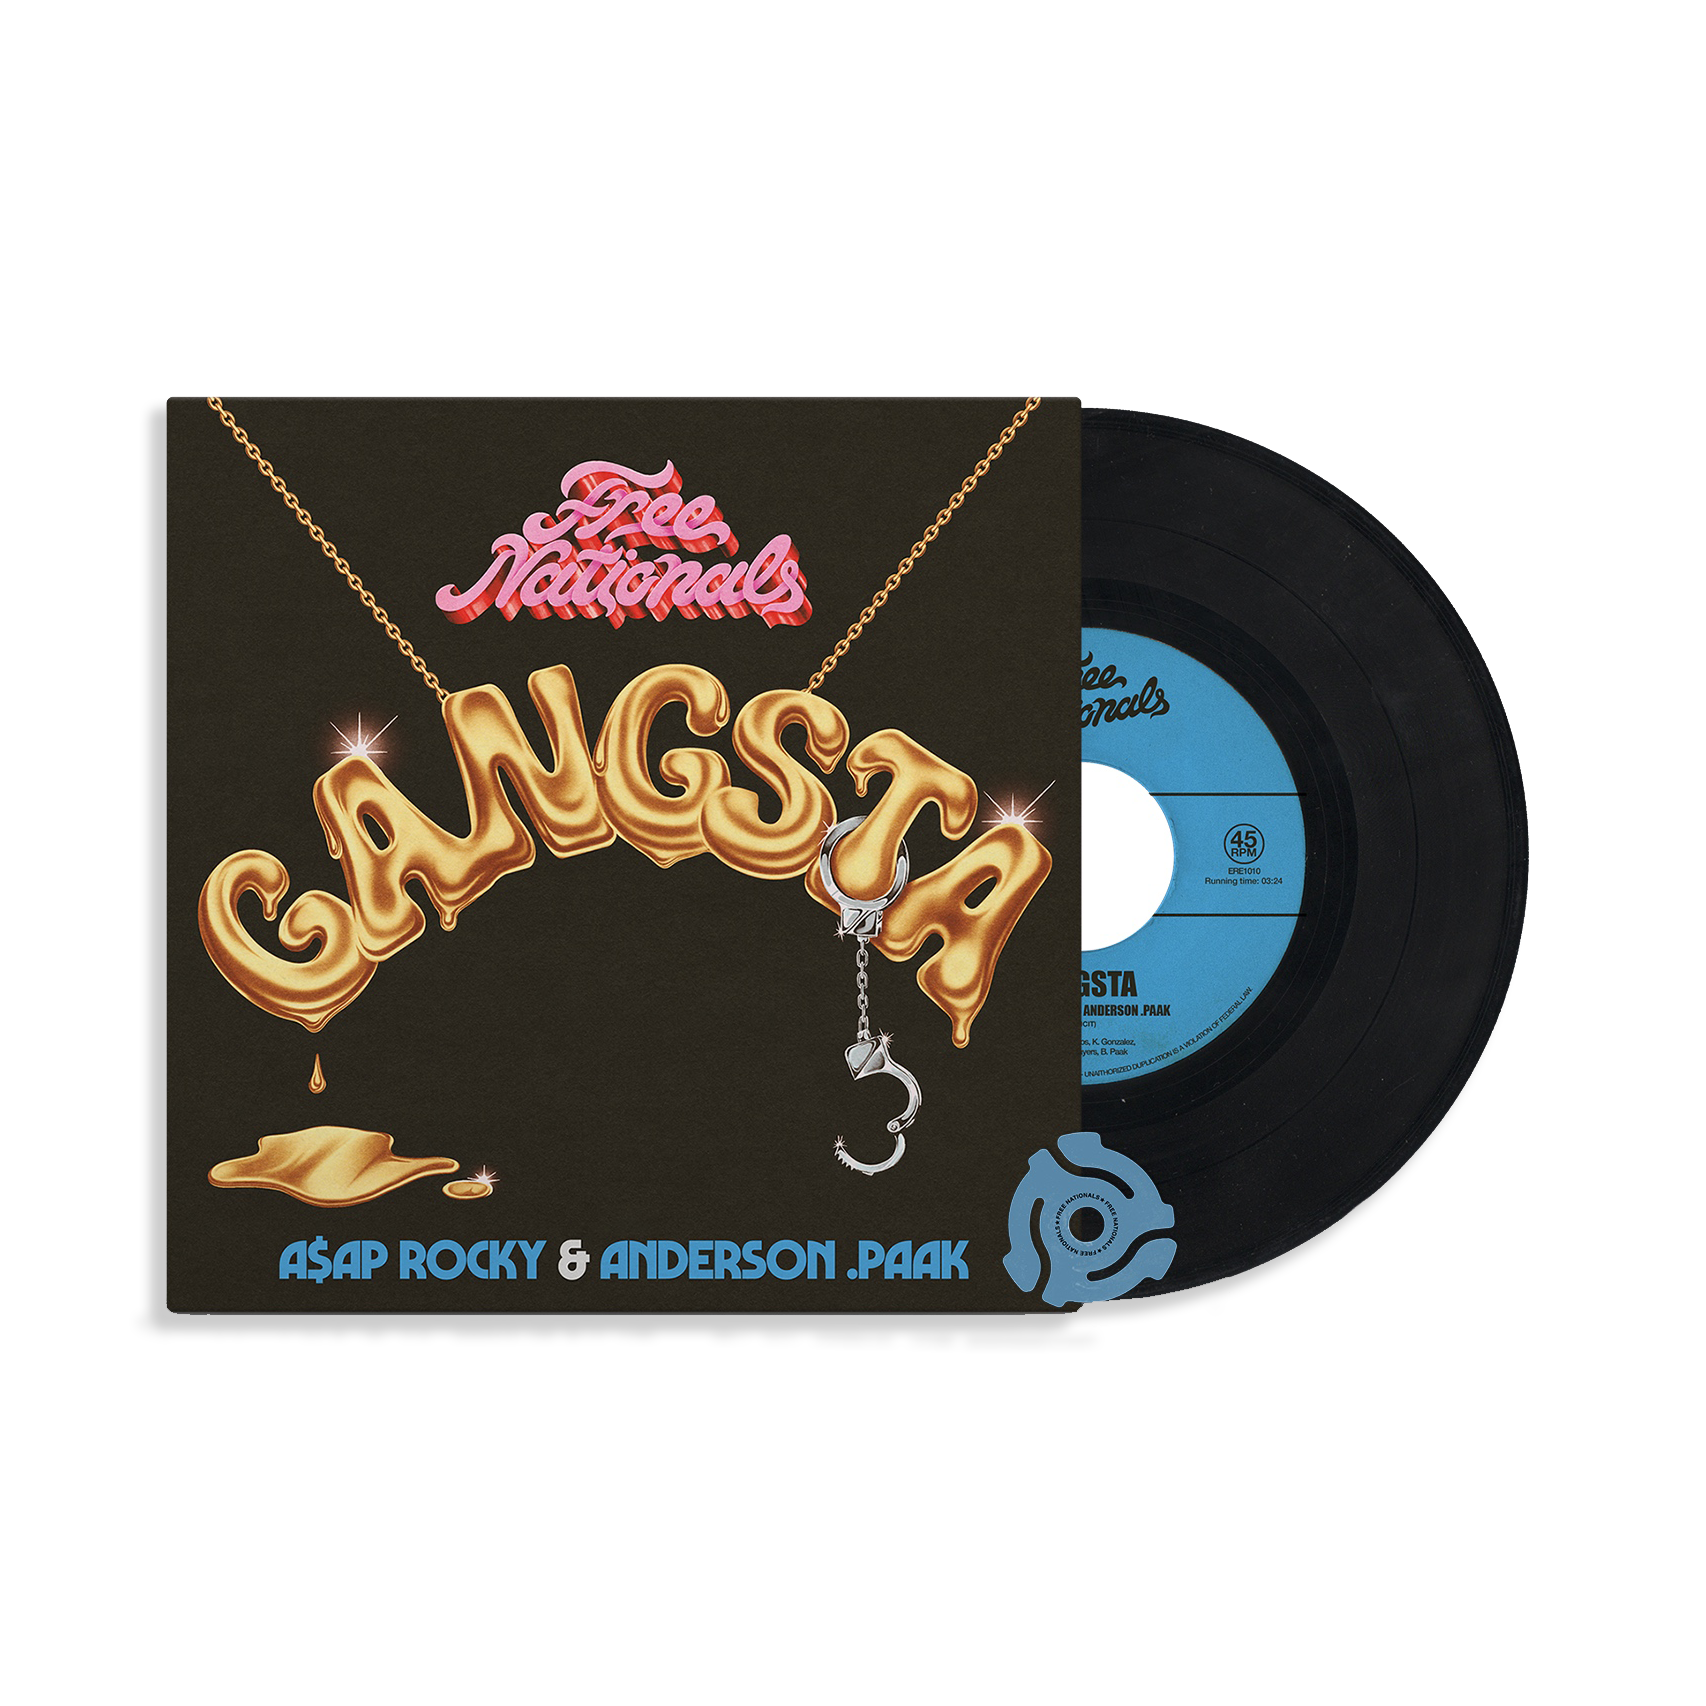 Free Nationals - Gangsta (feat. A$AP Rocky & Anderson .Paak): Vinyl 7" Single